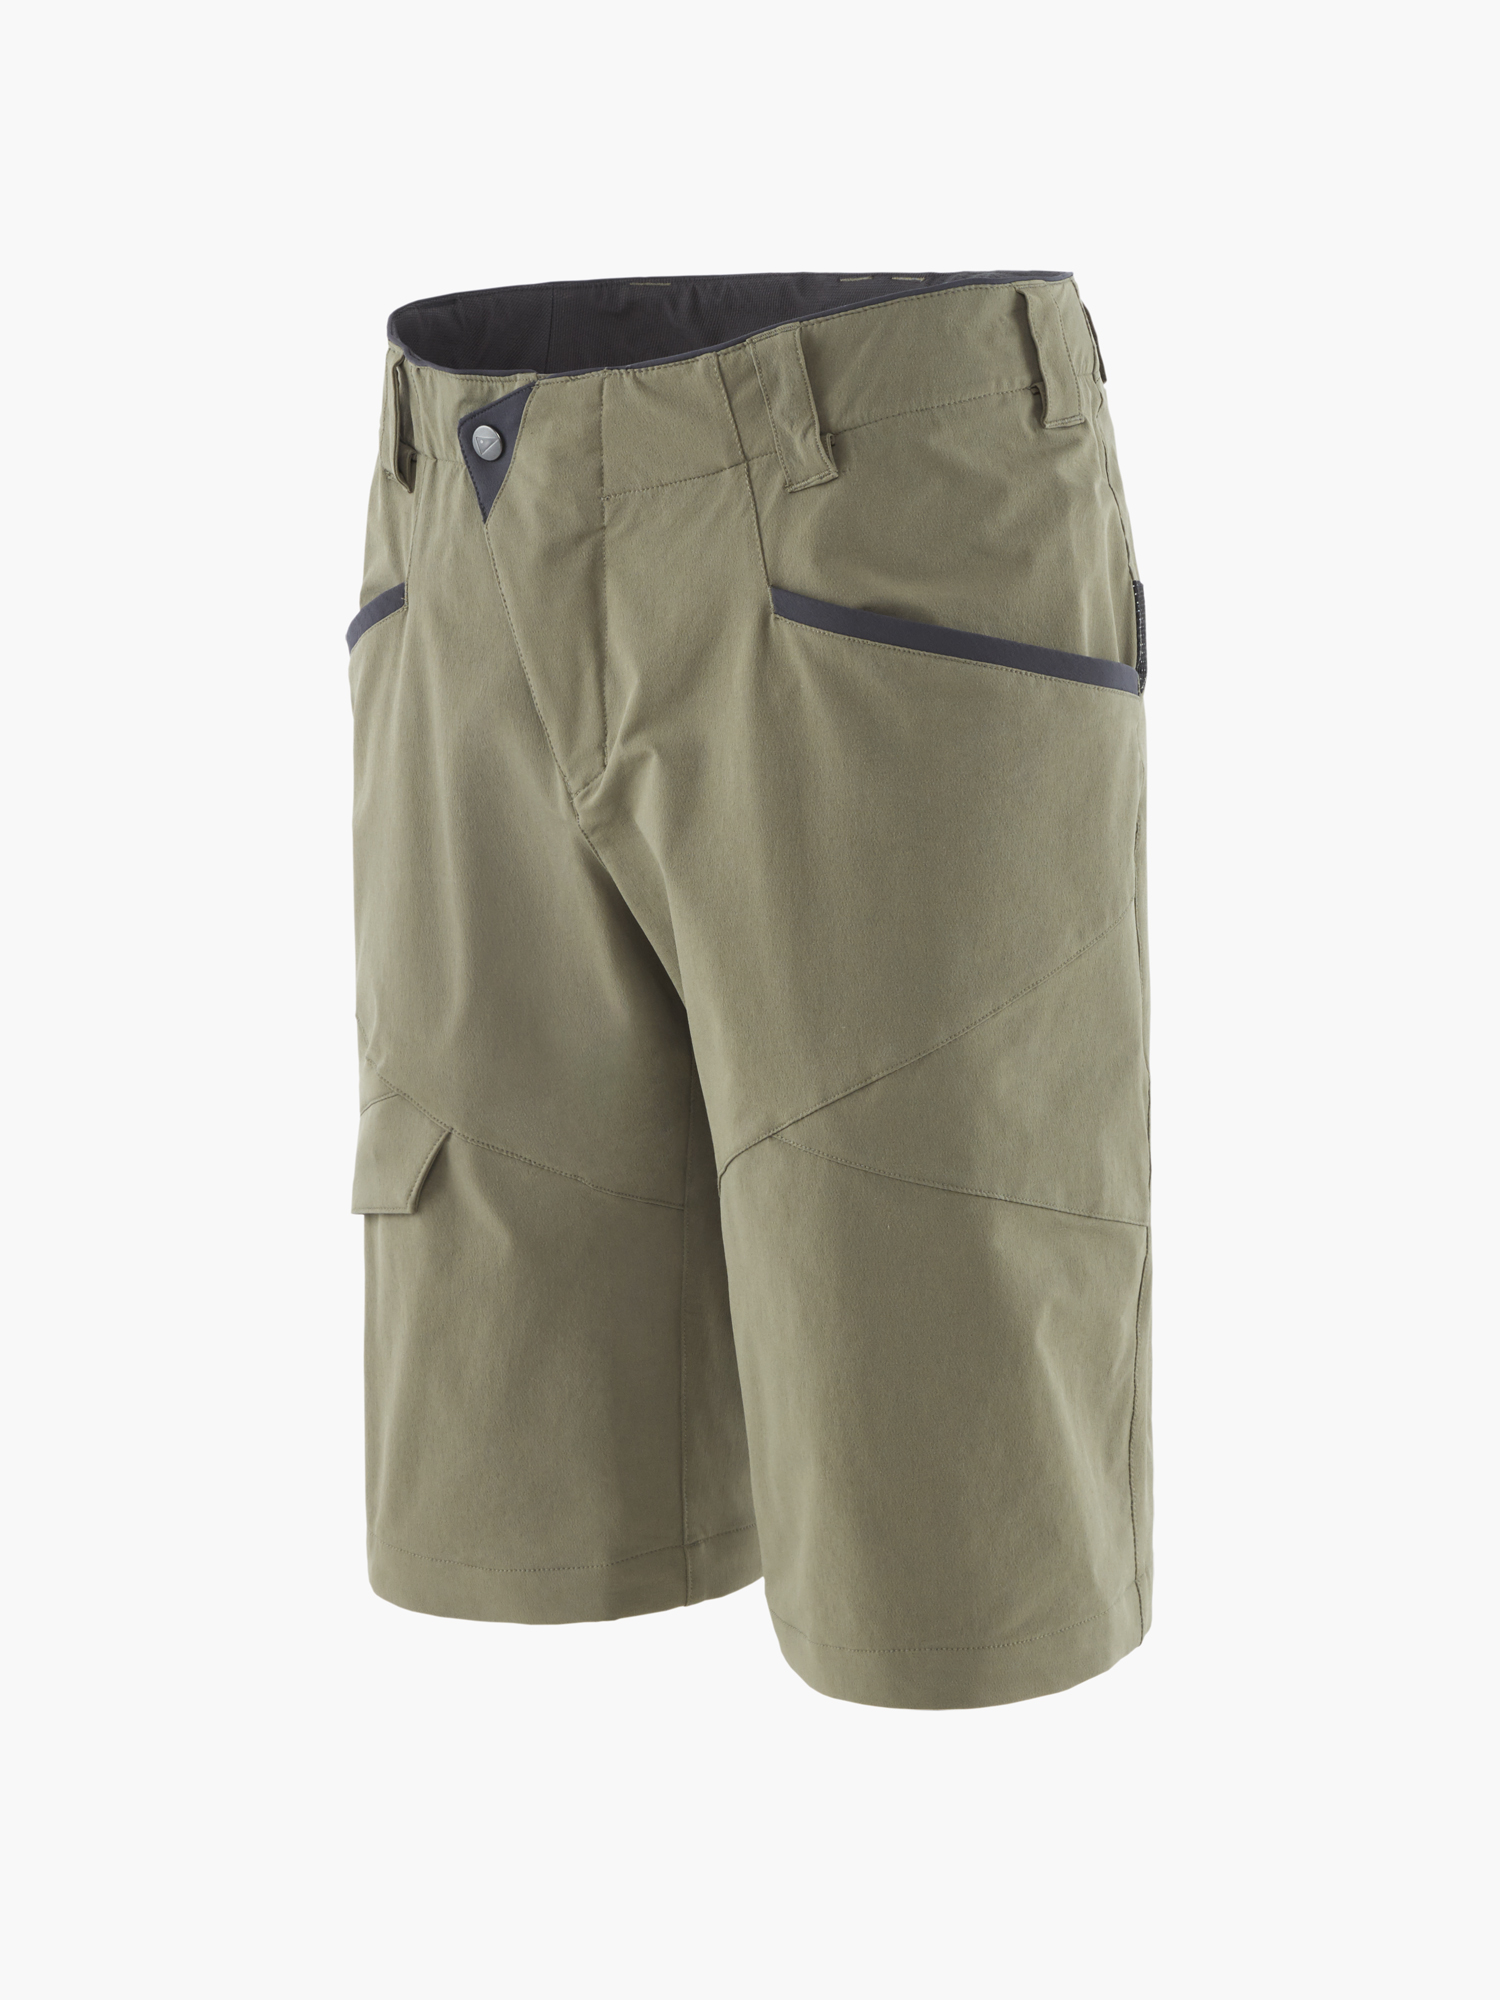 15574M91 - Magne 2.0 Shorts M's - Dusty Green